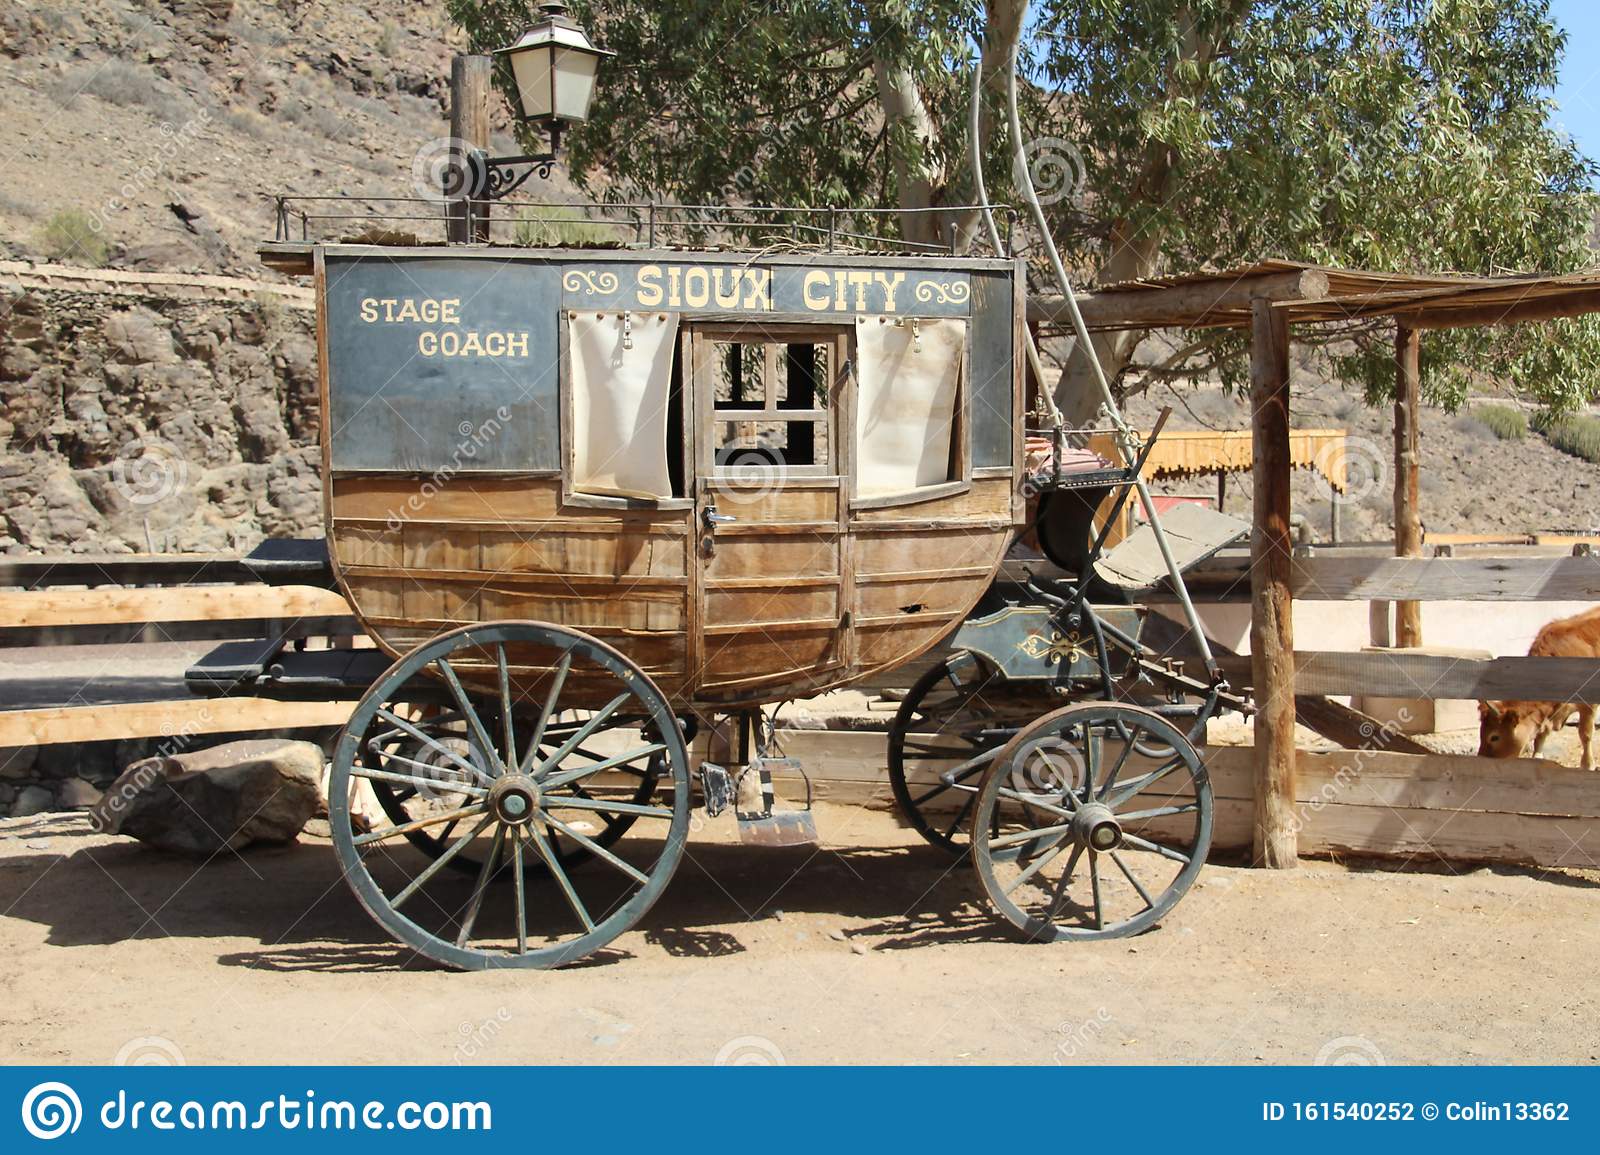 what was the speed of a stagecoach in the old west